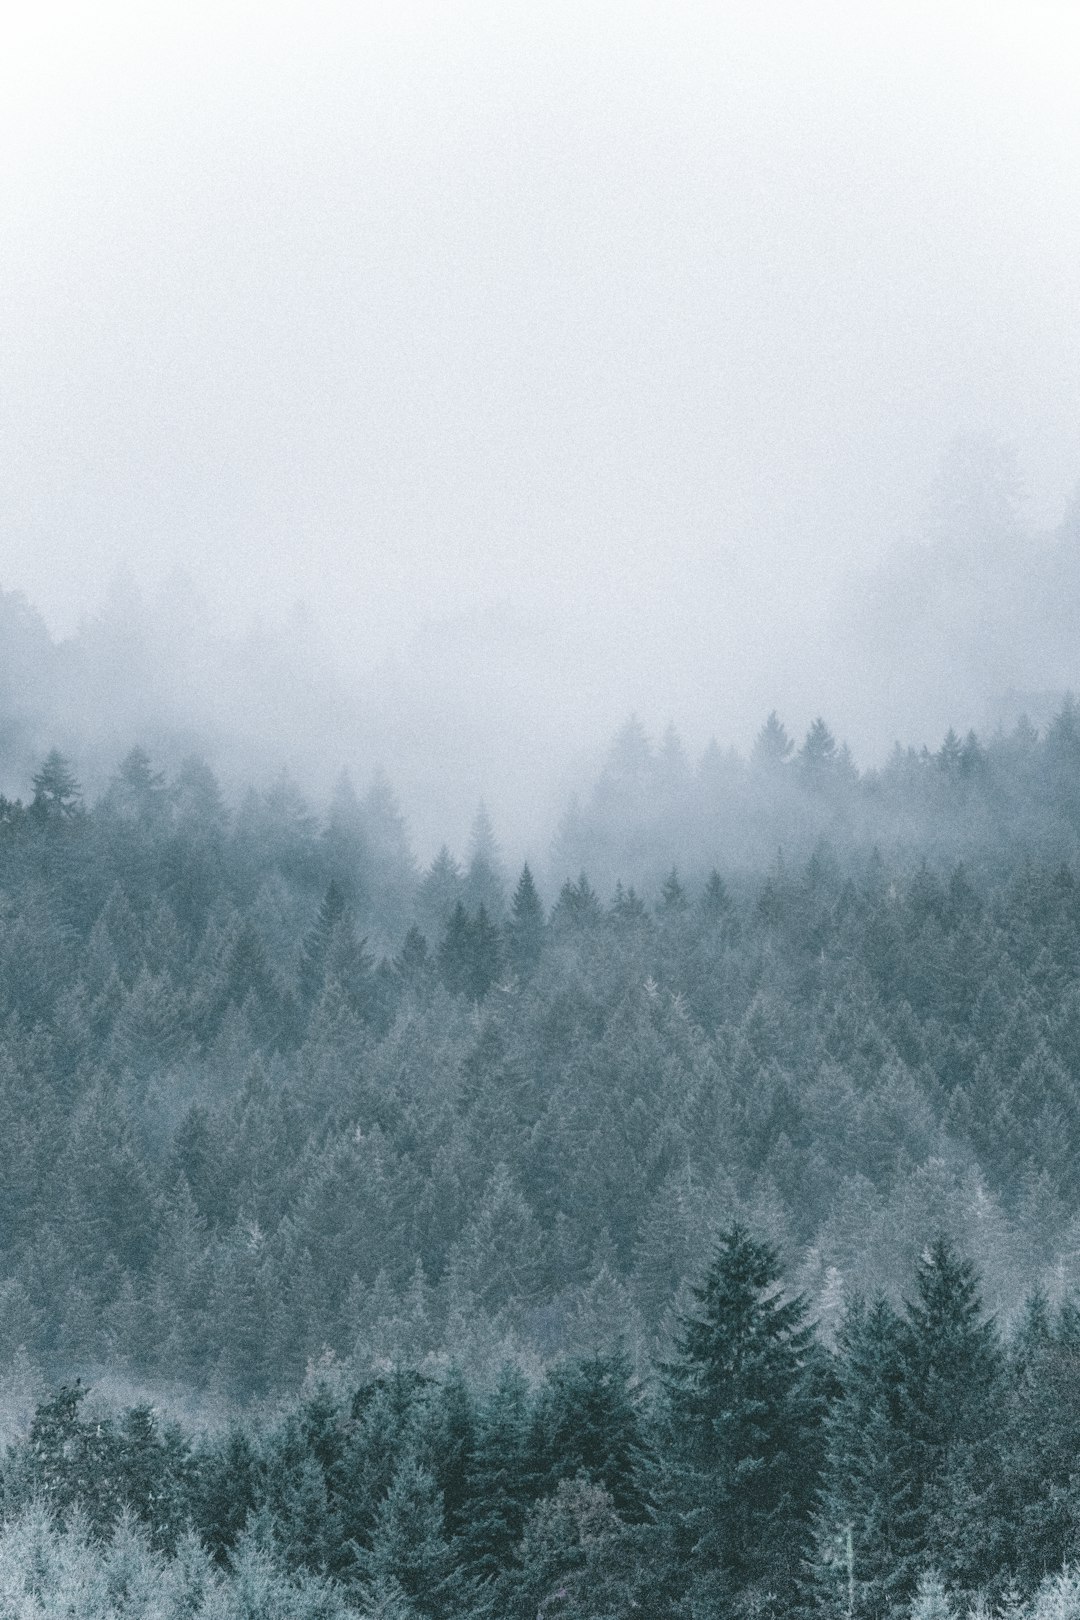 A misty forest in the distance, foggy and rainy weather, pine trees, white sky, minimalist photography style, gray tones, cool colors, vertical composition, high angle view, nature background. –ar 85:128